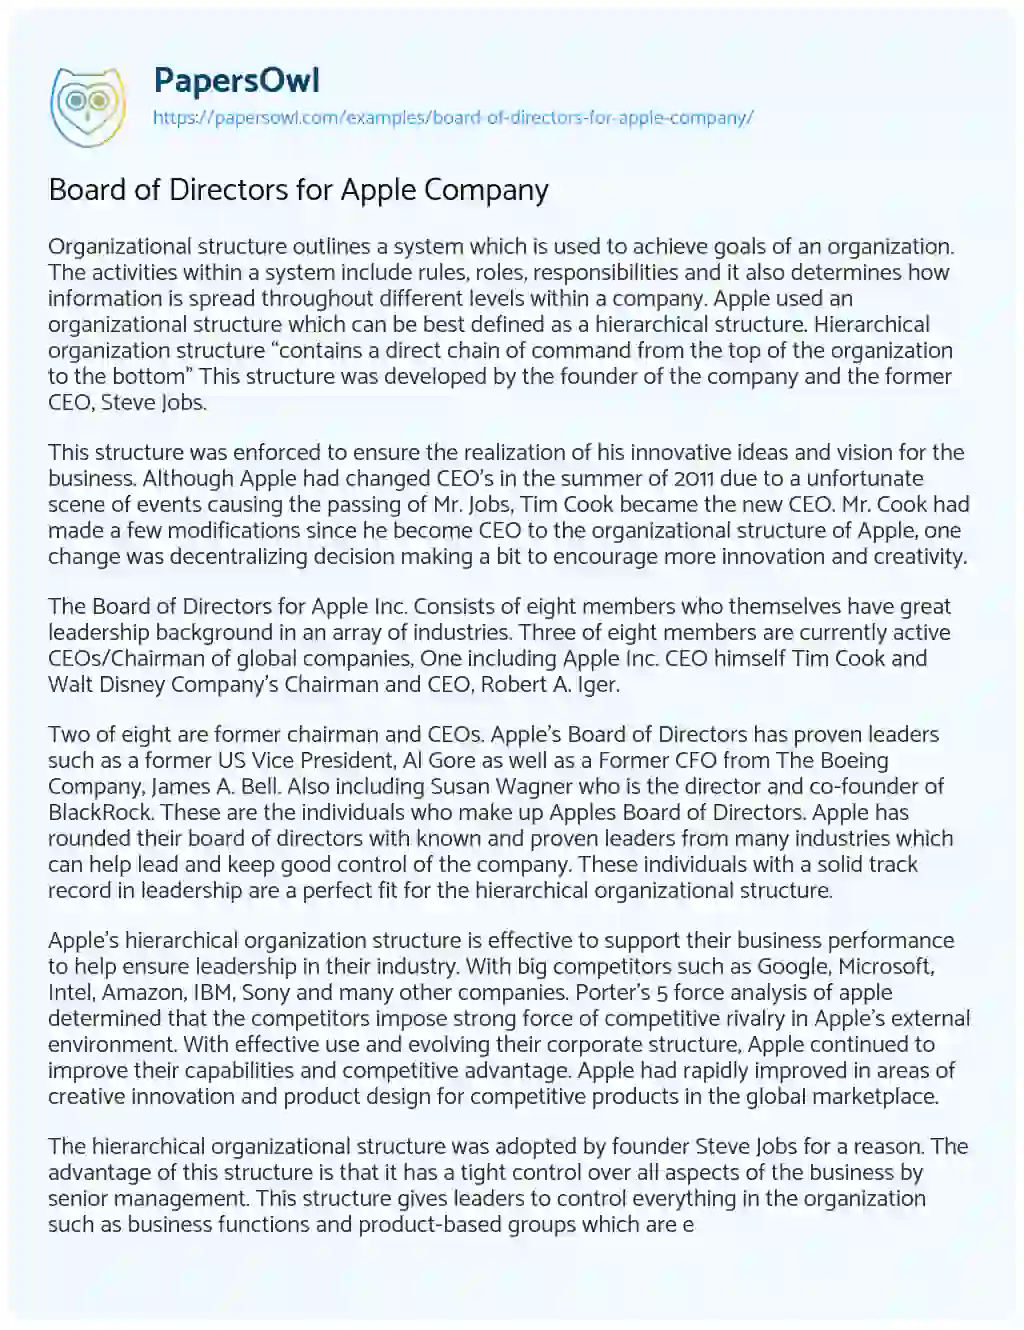 Essay on Board of Directors for Apple Company